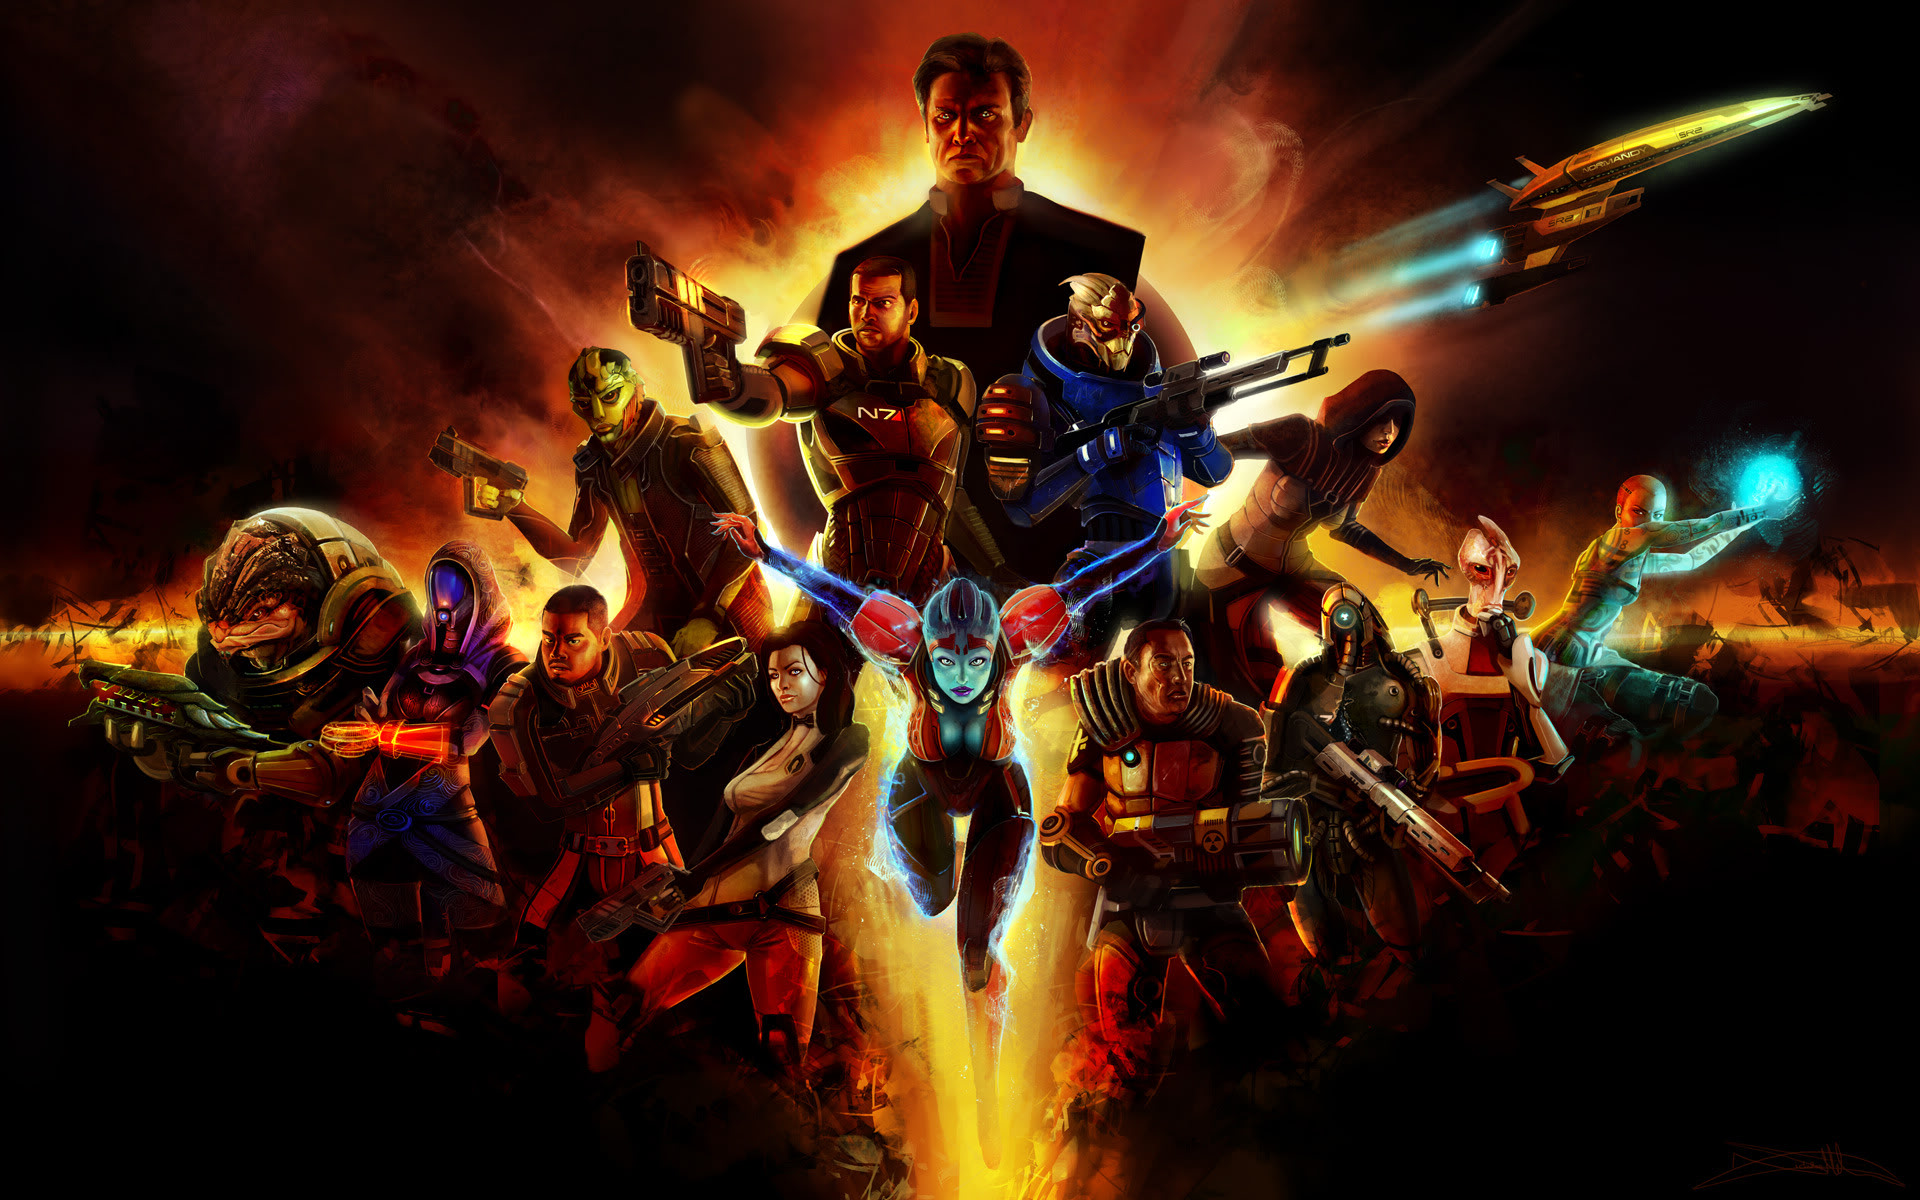 An Awesome Piece Of Art Showcasing The Major Characters Mass Effect